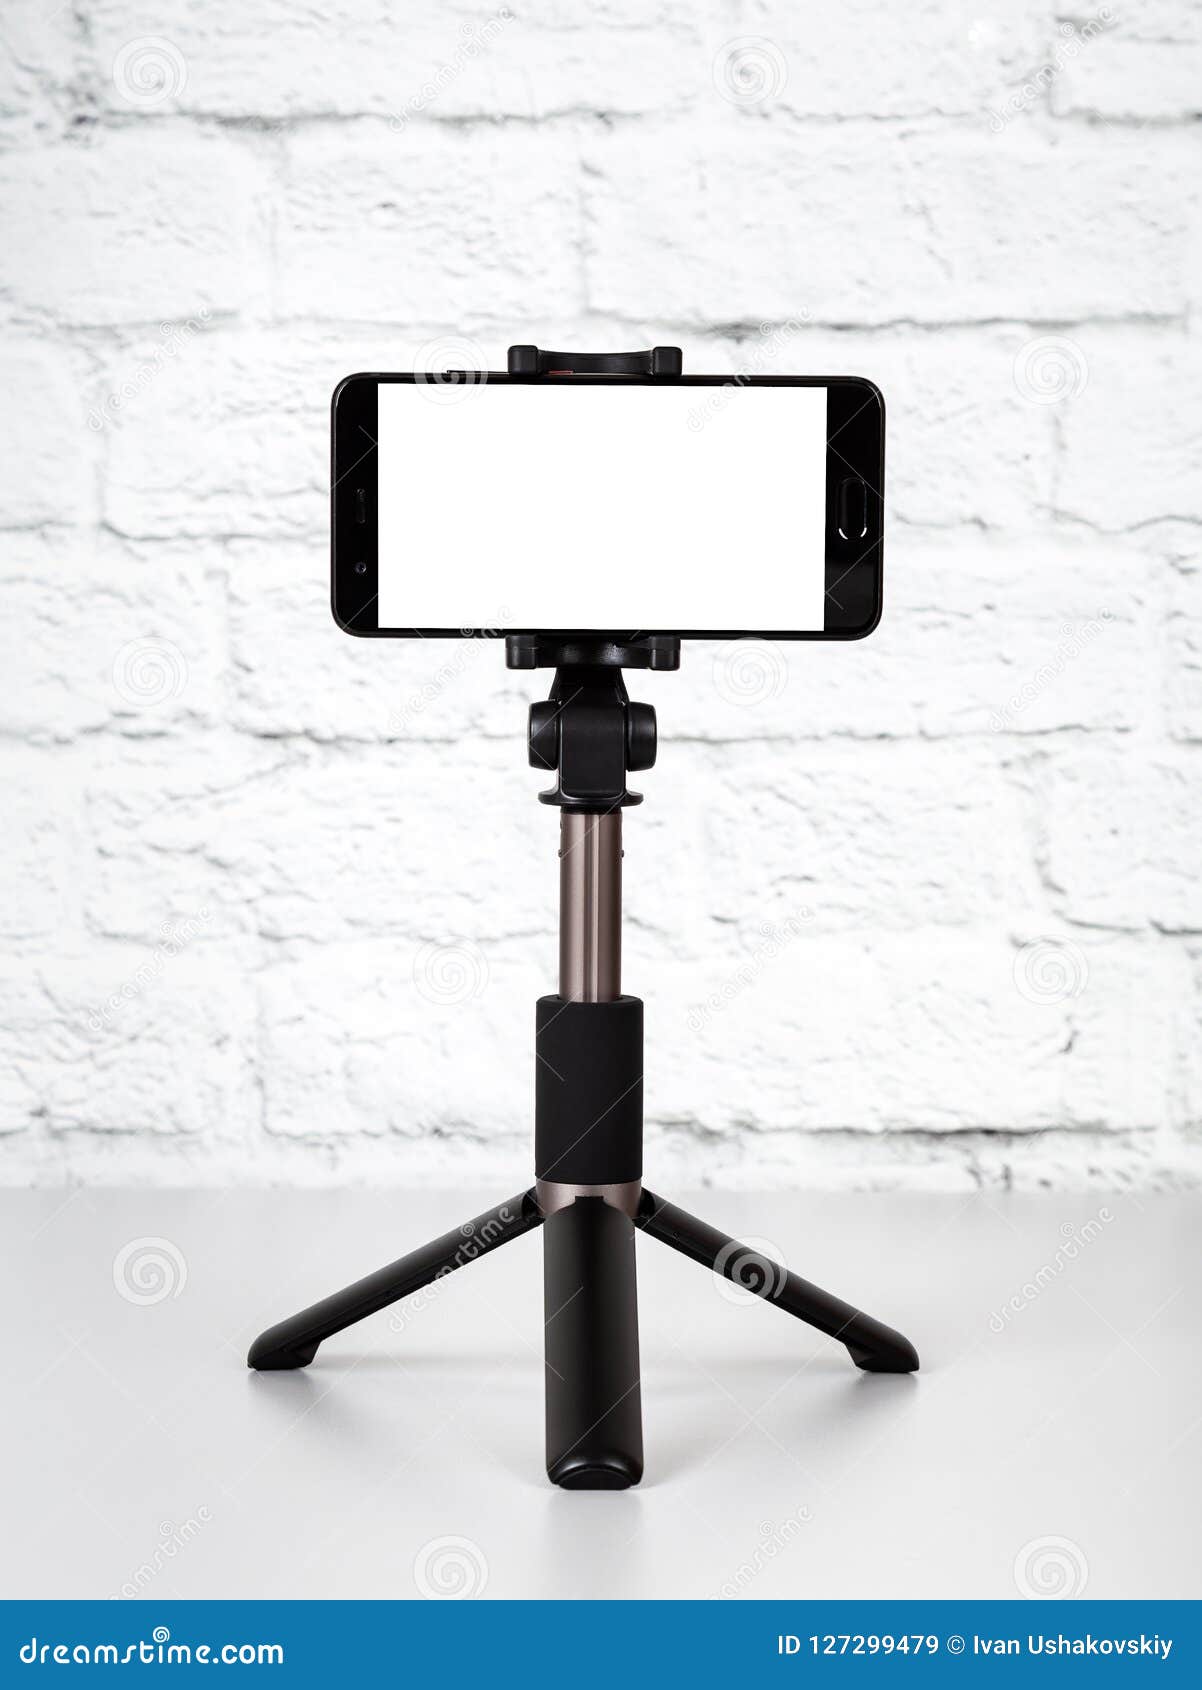 mockup with smartphone on a tripod with empty screen